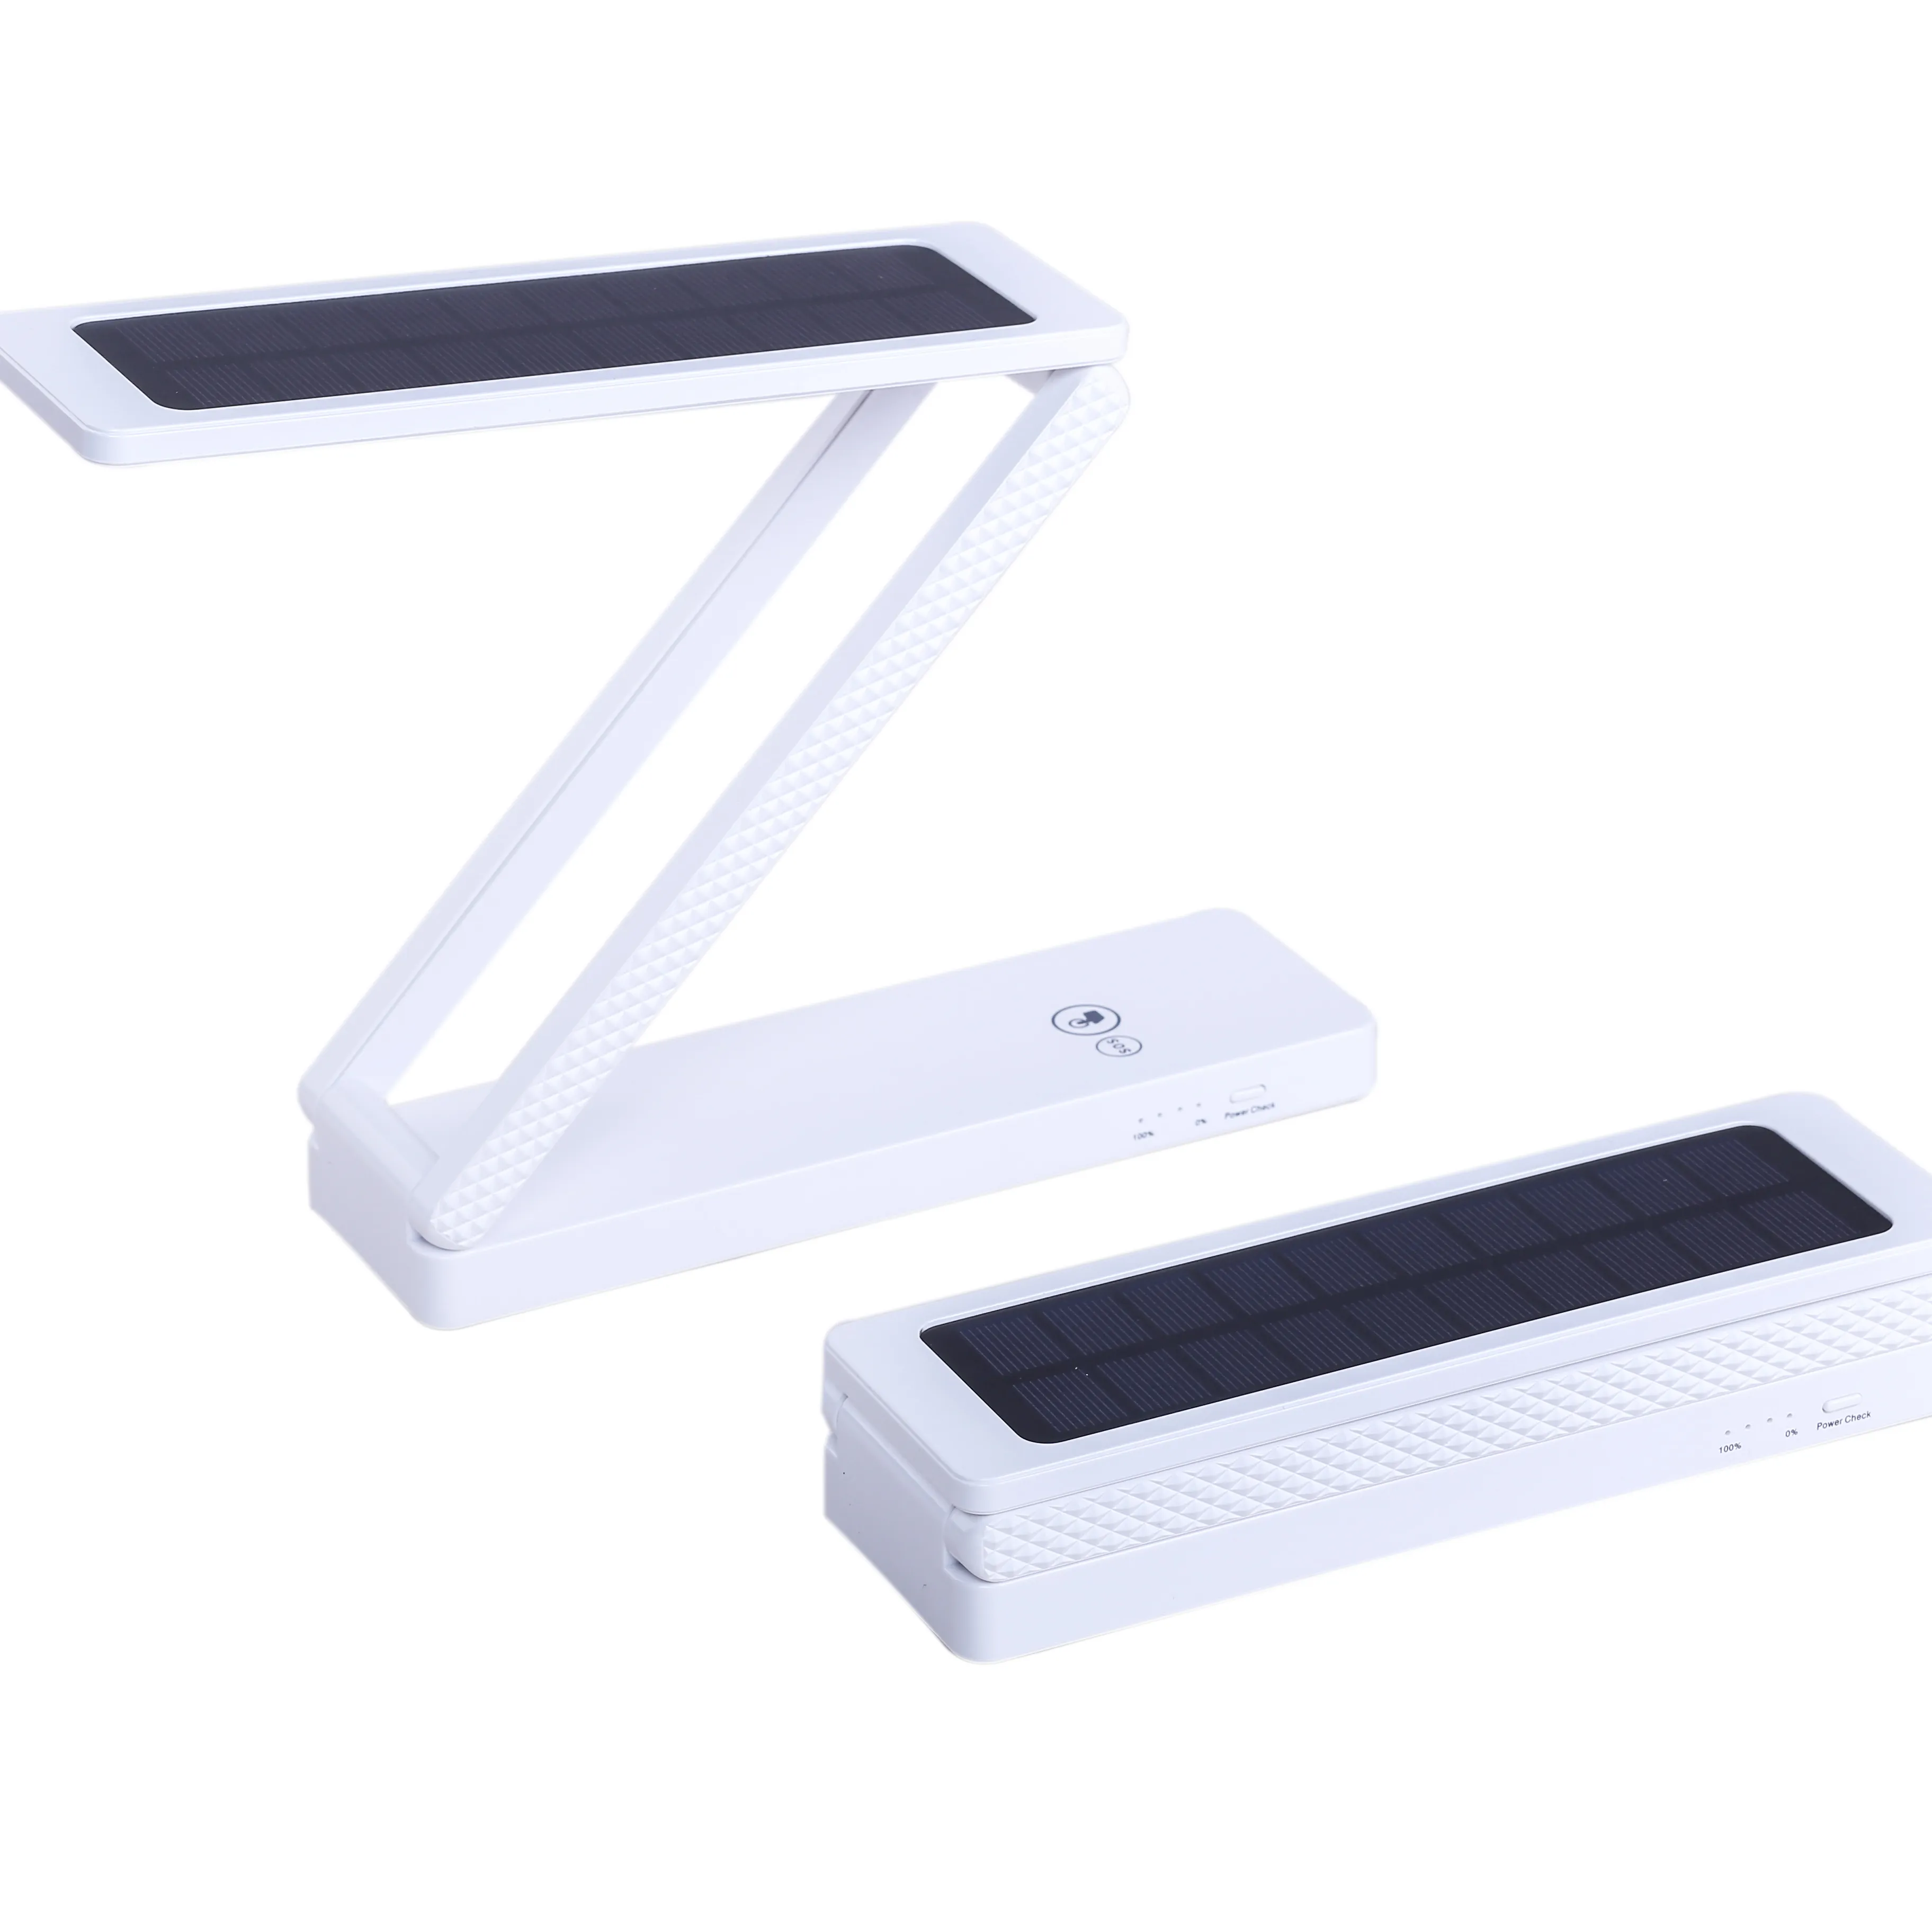 Solar LED Desk Lamp Eye caring Touch Control Table Lamps Foldable Table Lamp for Reading, Studying